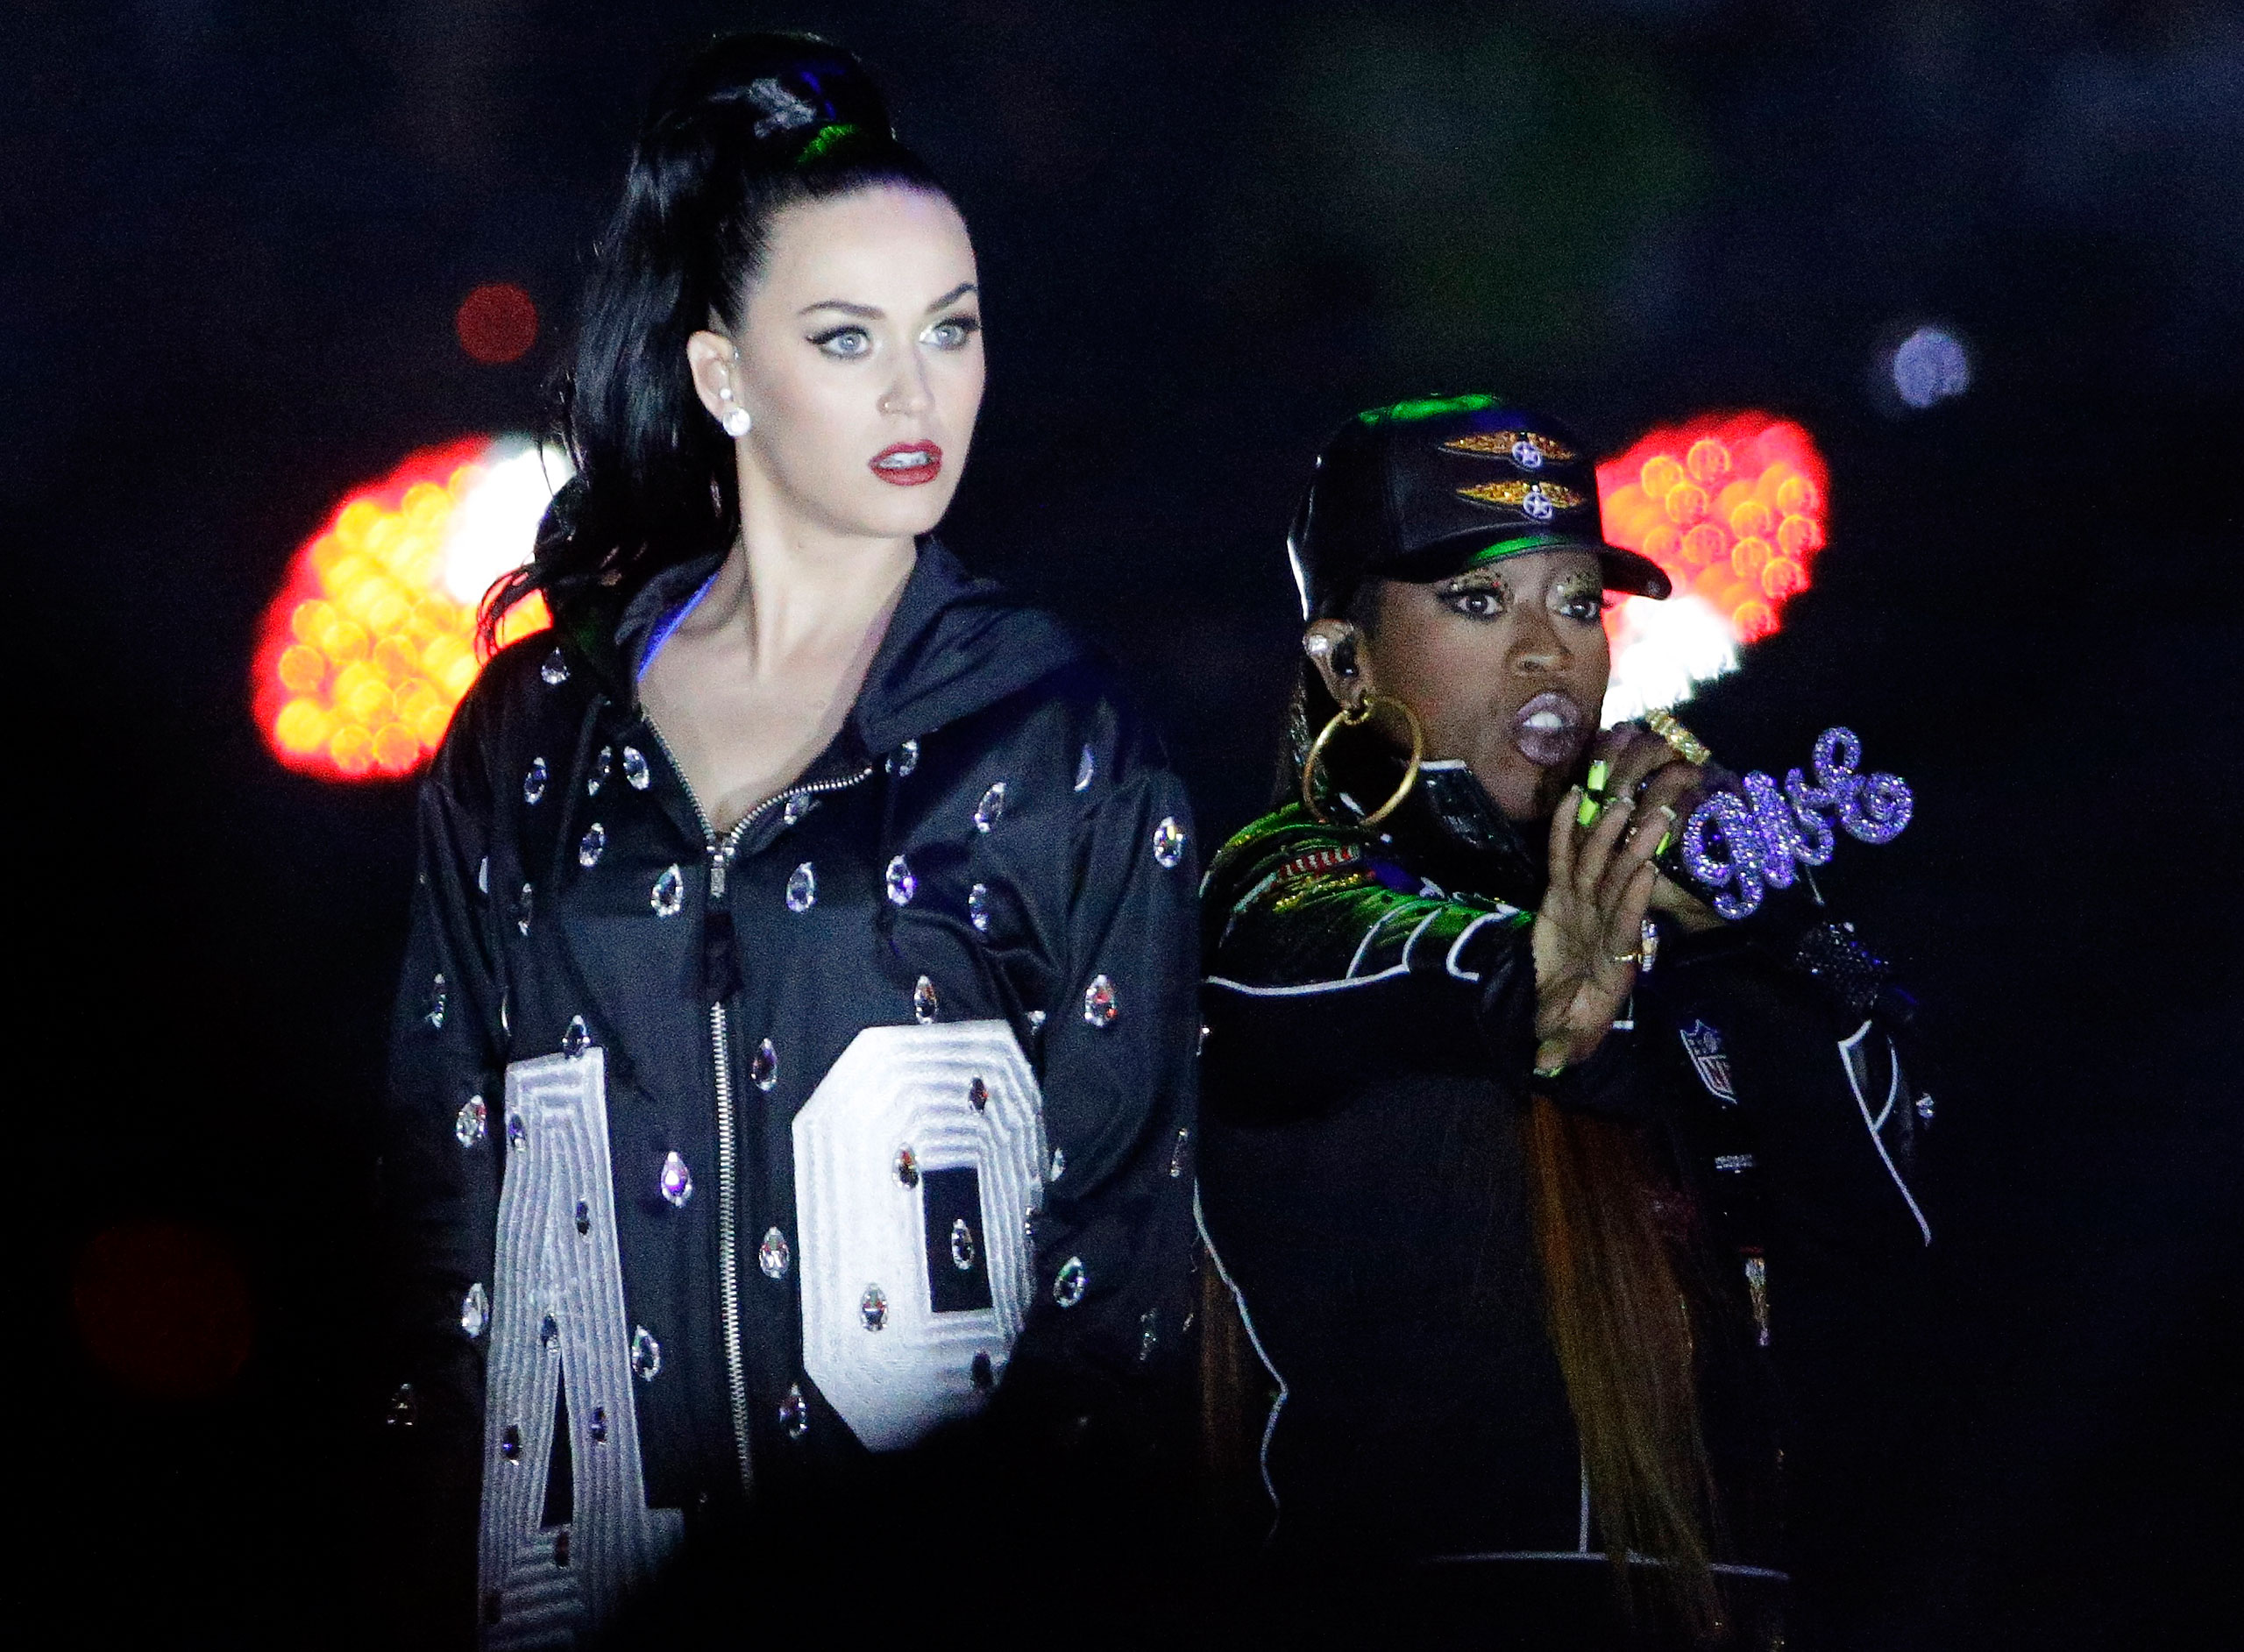 Katy Perry, left, and Missy Elliott perform during halftime of NFL Super Bowl XLIX football game between the Seattle Seahawks and the New England Patriots on Feb. 1, 2015 in Glendale, Ariz.